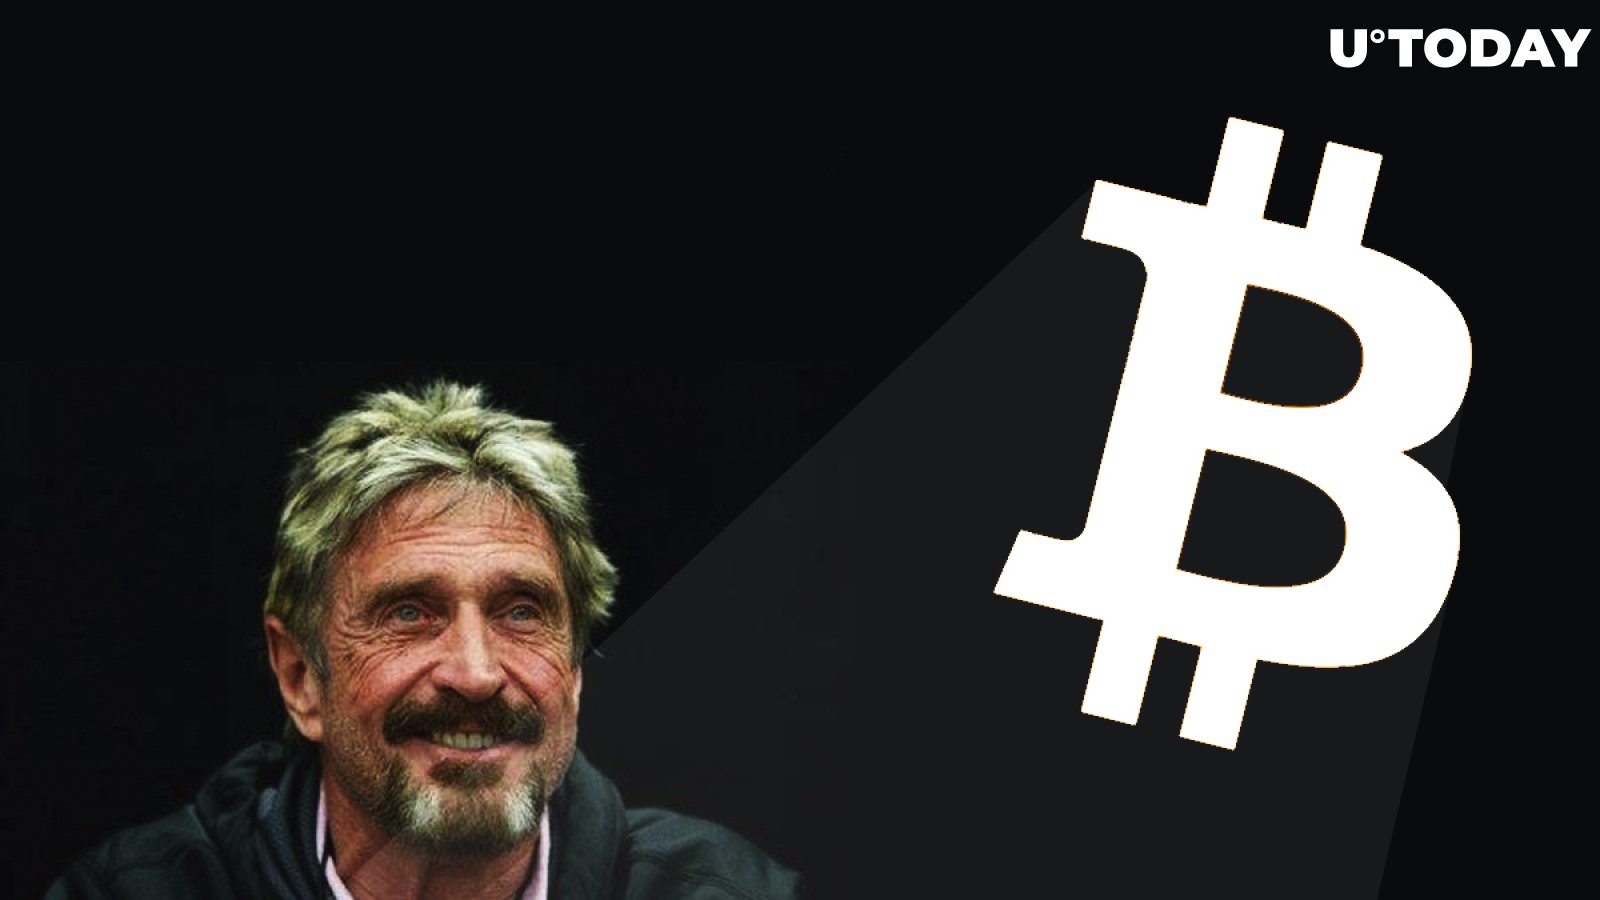 Bitcoin Lover John McAfee Promises to Reveal Data Compromising US Government Unless Feds Leave Him Alone